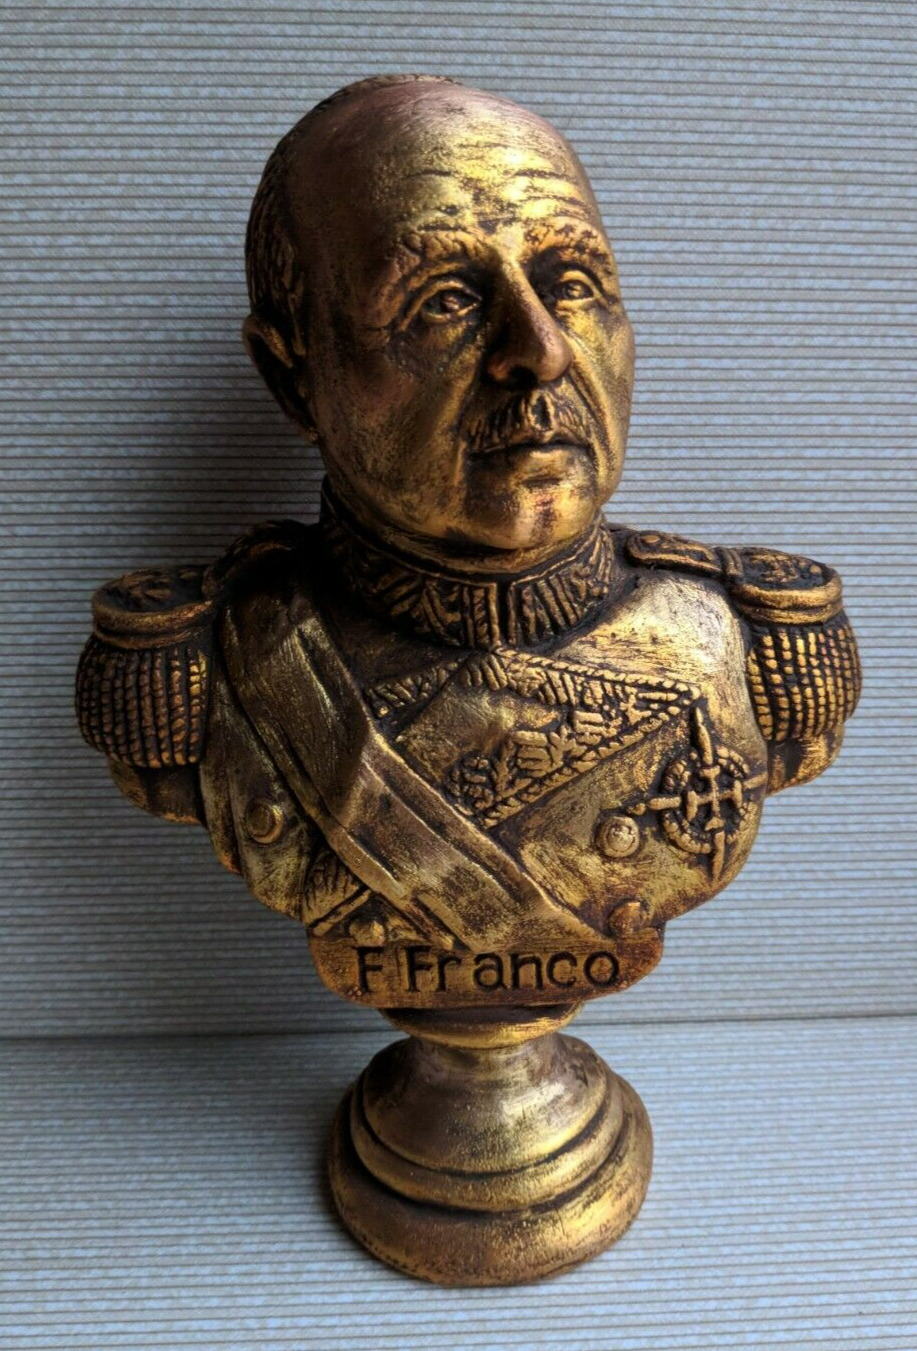 Spanish Military and Statesman Francisco Franco bust statue sculpture figurine